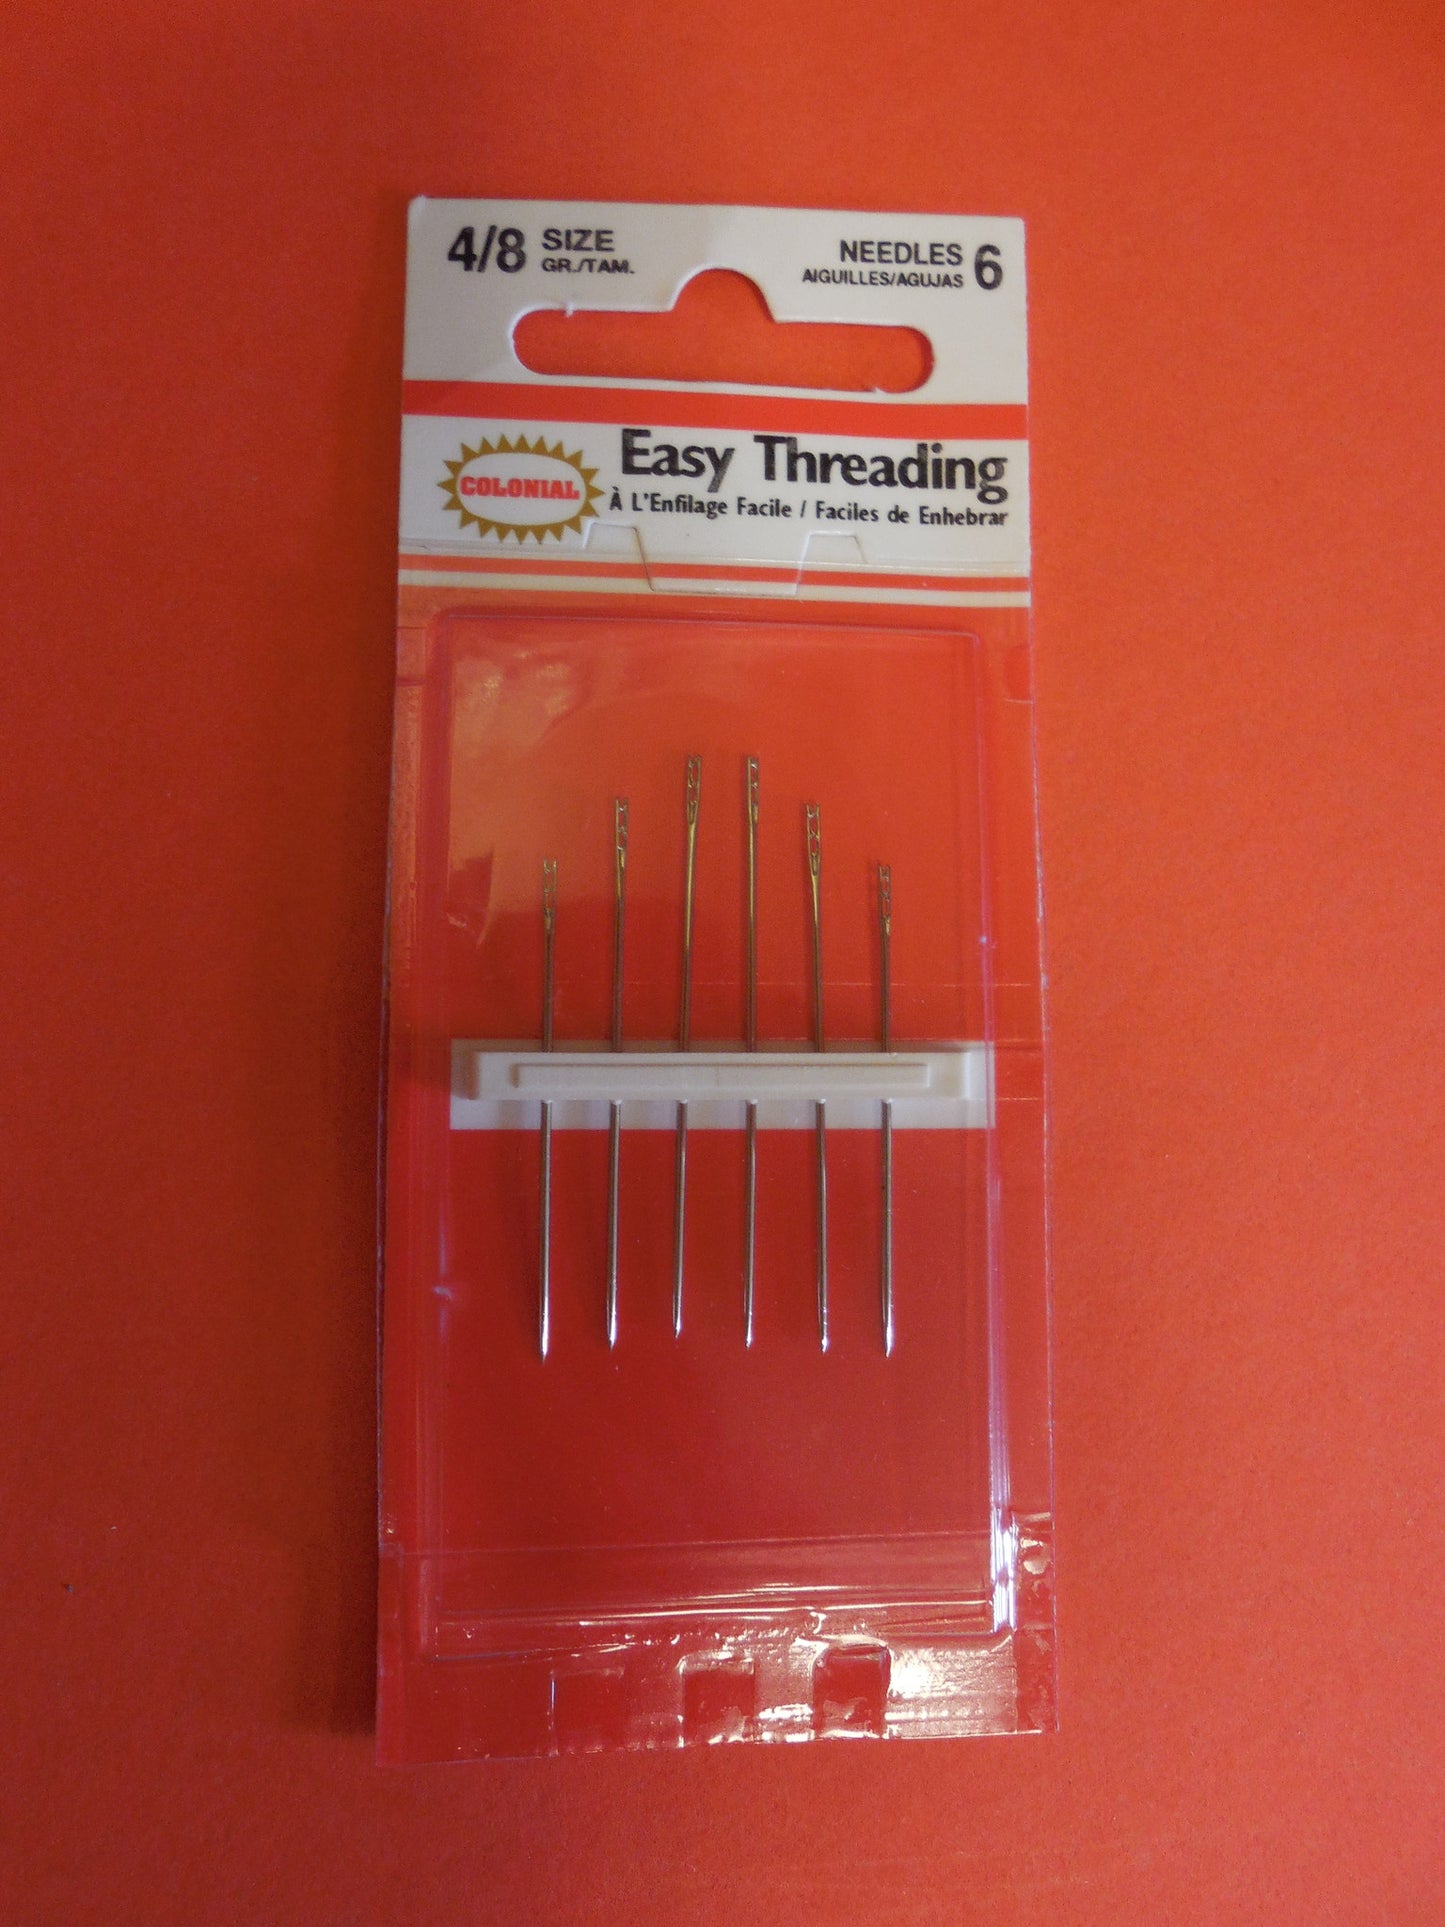 A 6 pack of easy threading needles